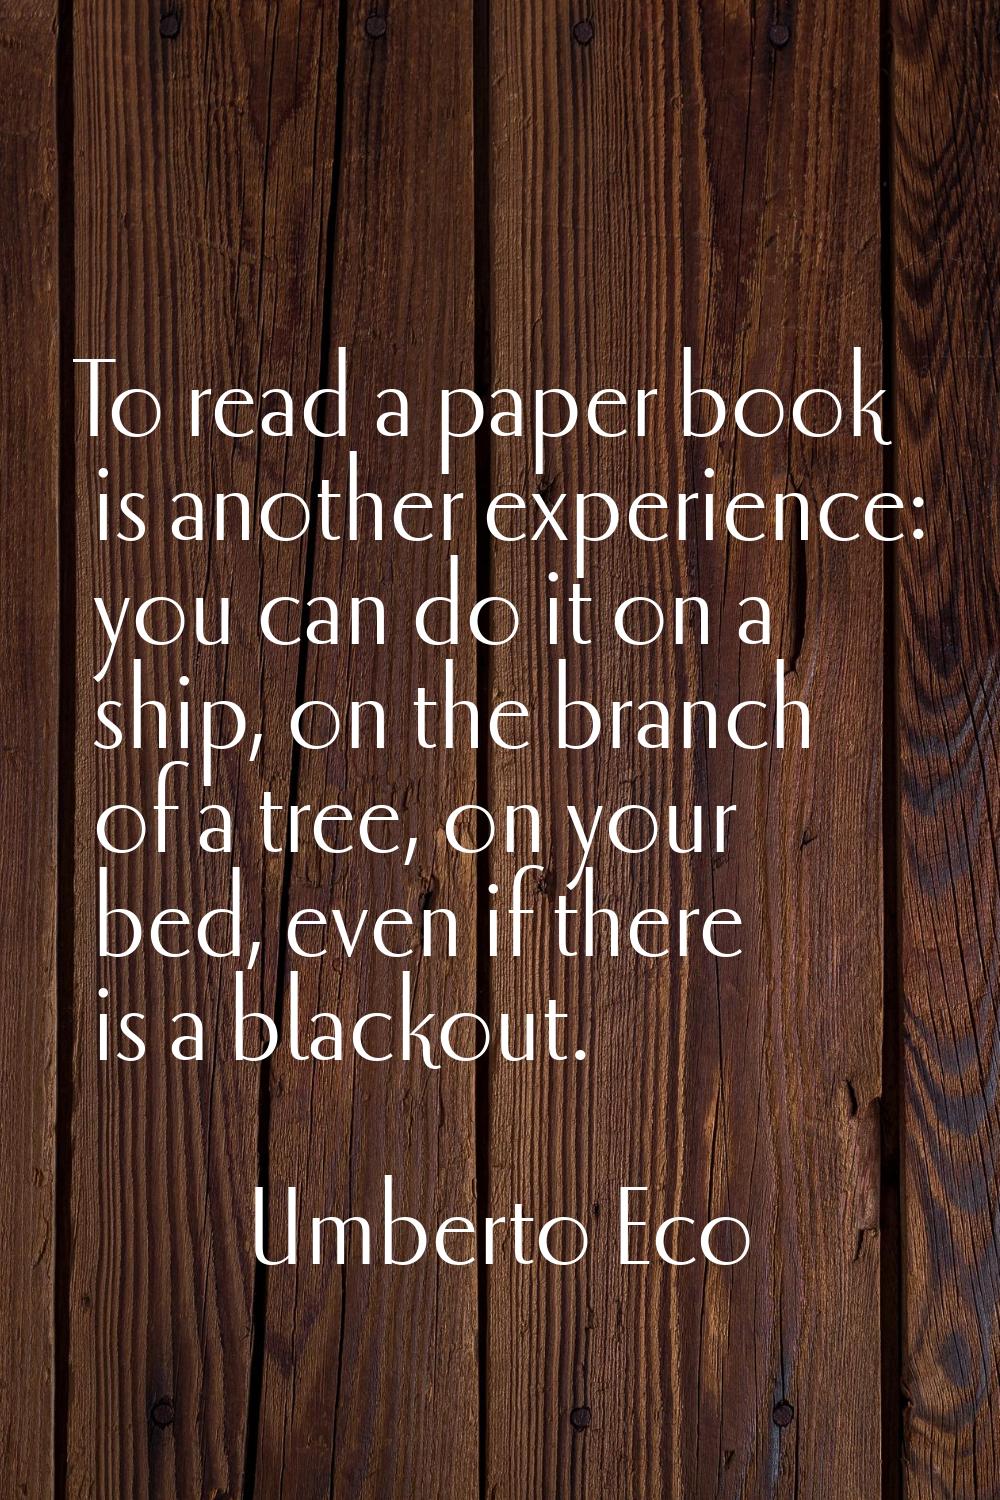 To read a paper book is another experience: you can do it on a ship, on the branch of a tree, on yo